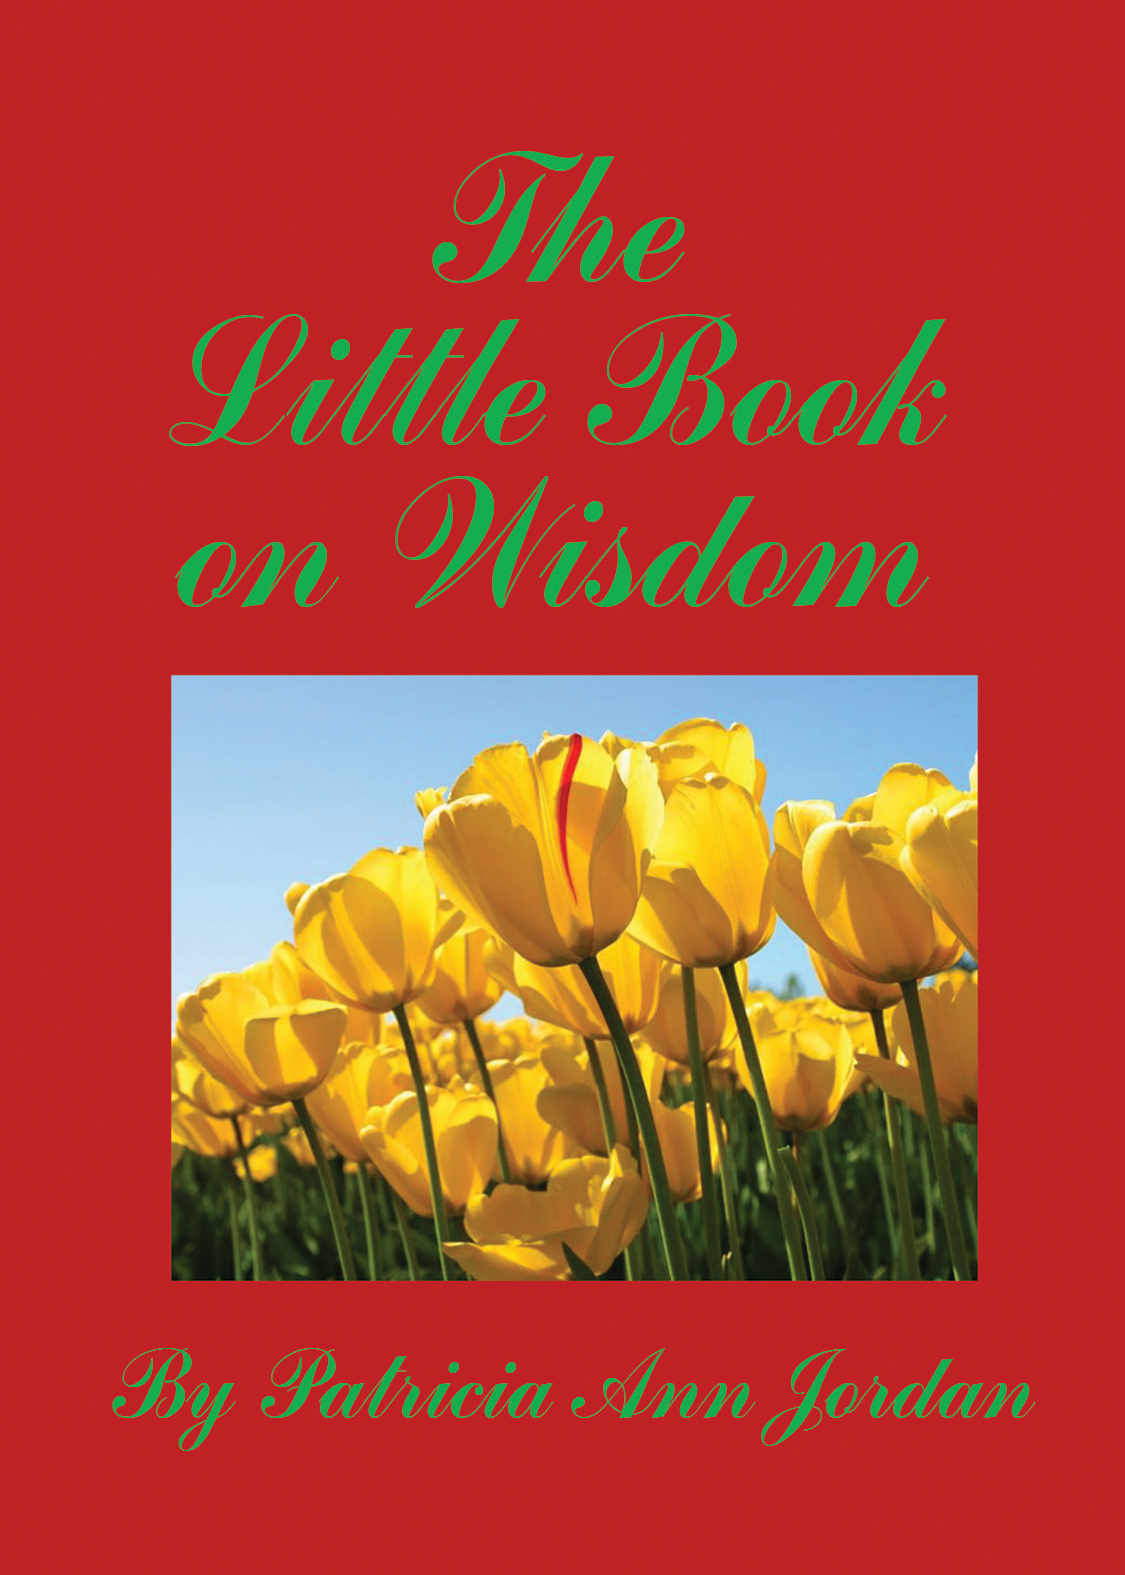 The Little Book on Wisdom